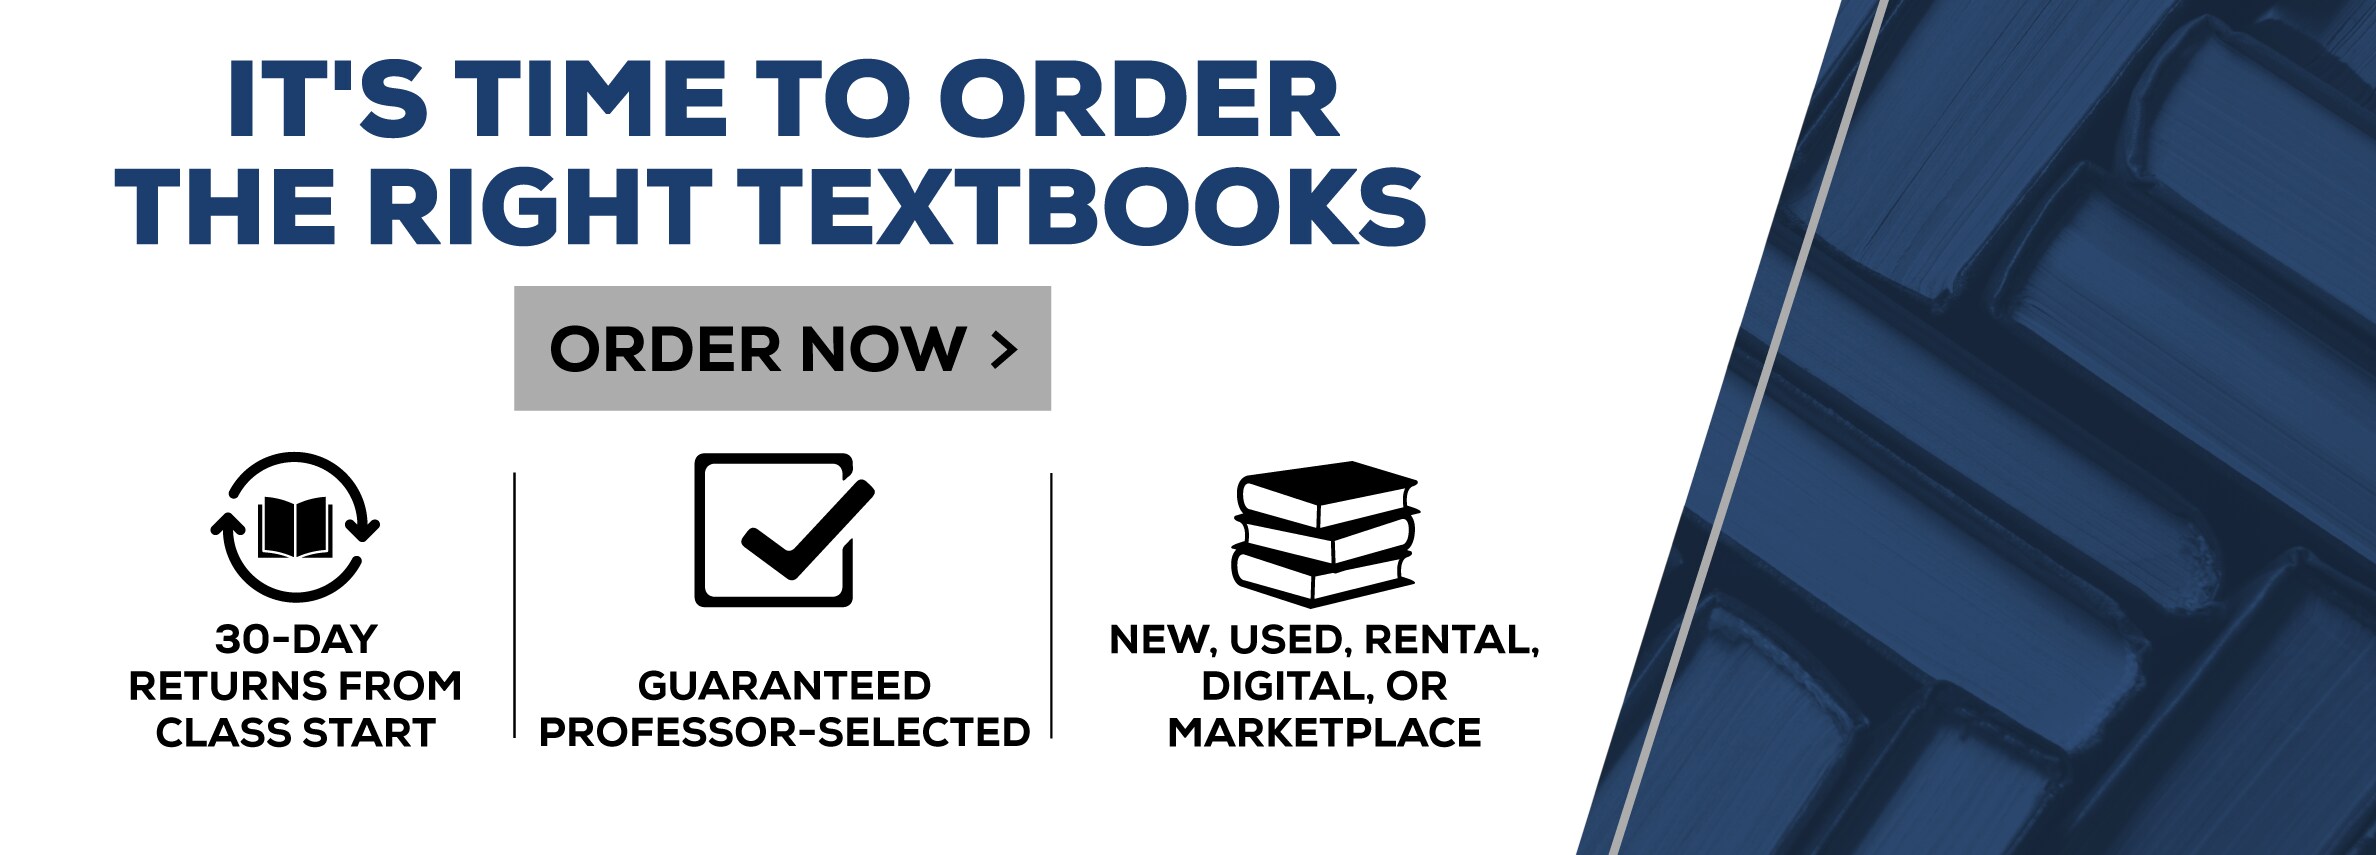 It's time to order the right textbooks. Order now. 30-day returns from class start. Guaranteed professor-selected. New, Used, rental, digital, or marketplace.